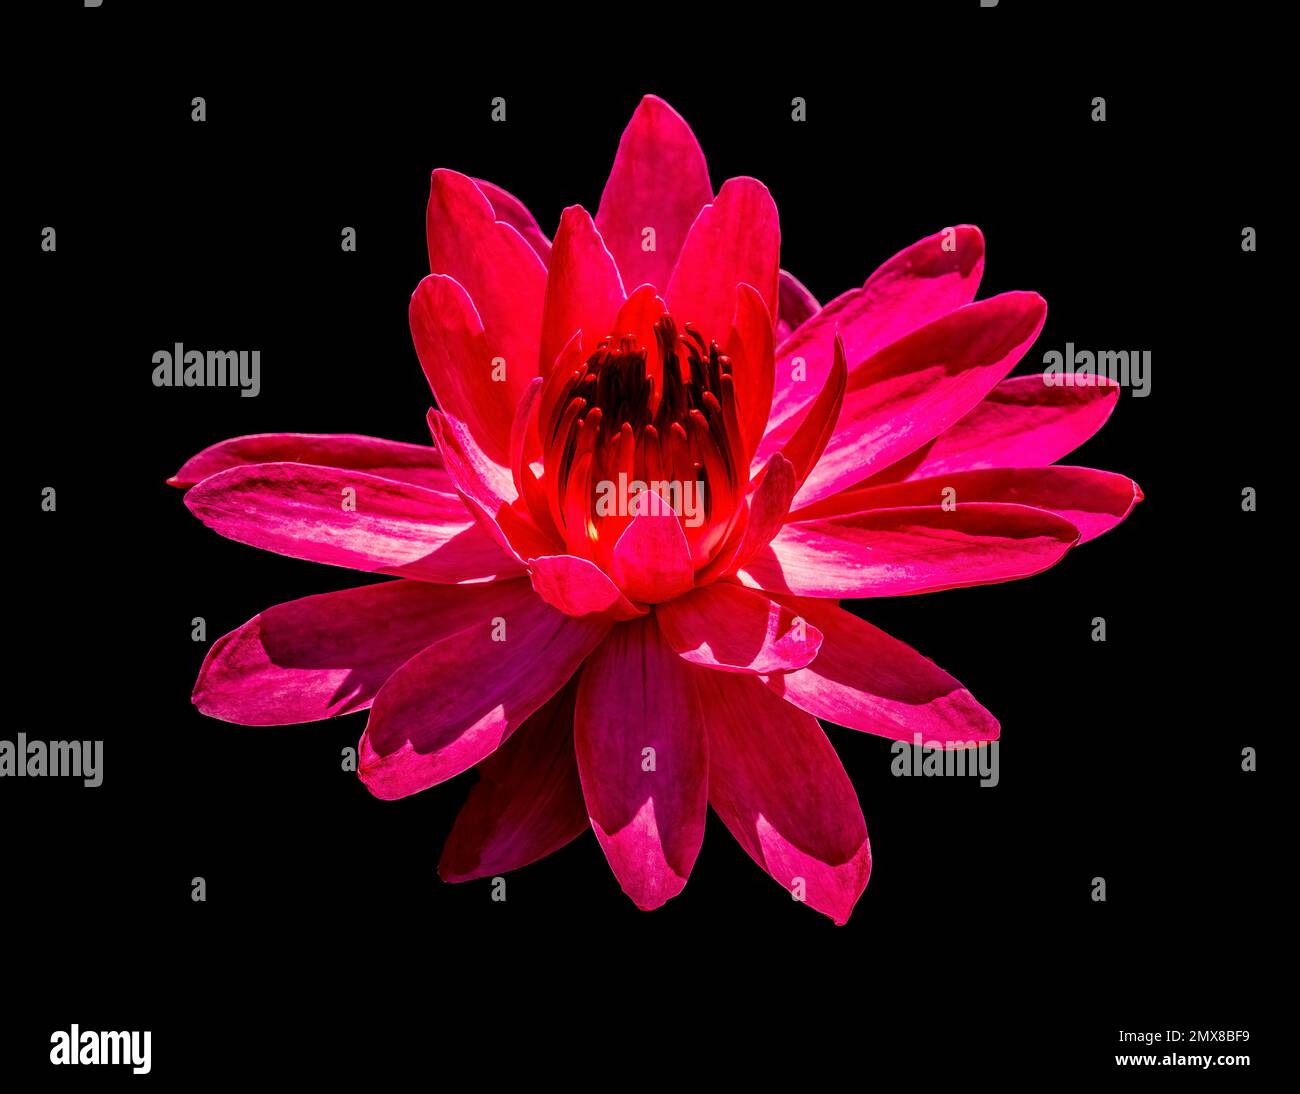 All red Waterlily aganist a black background Stock Photo